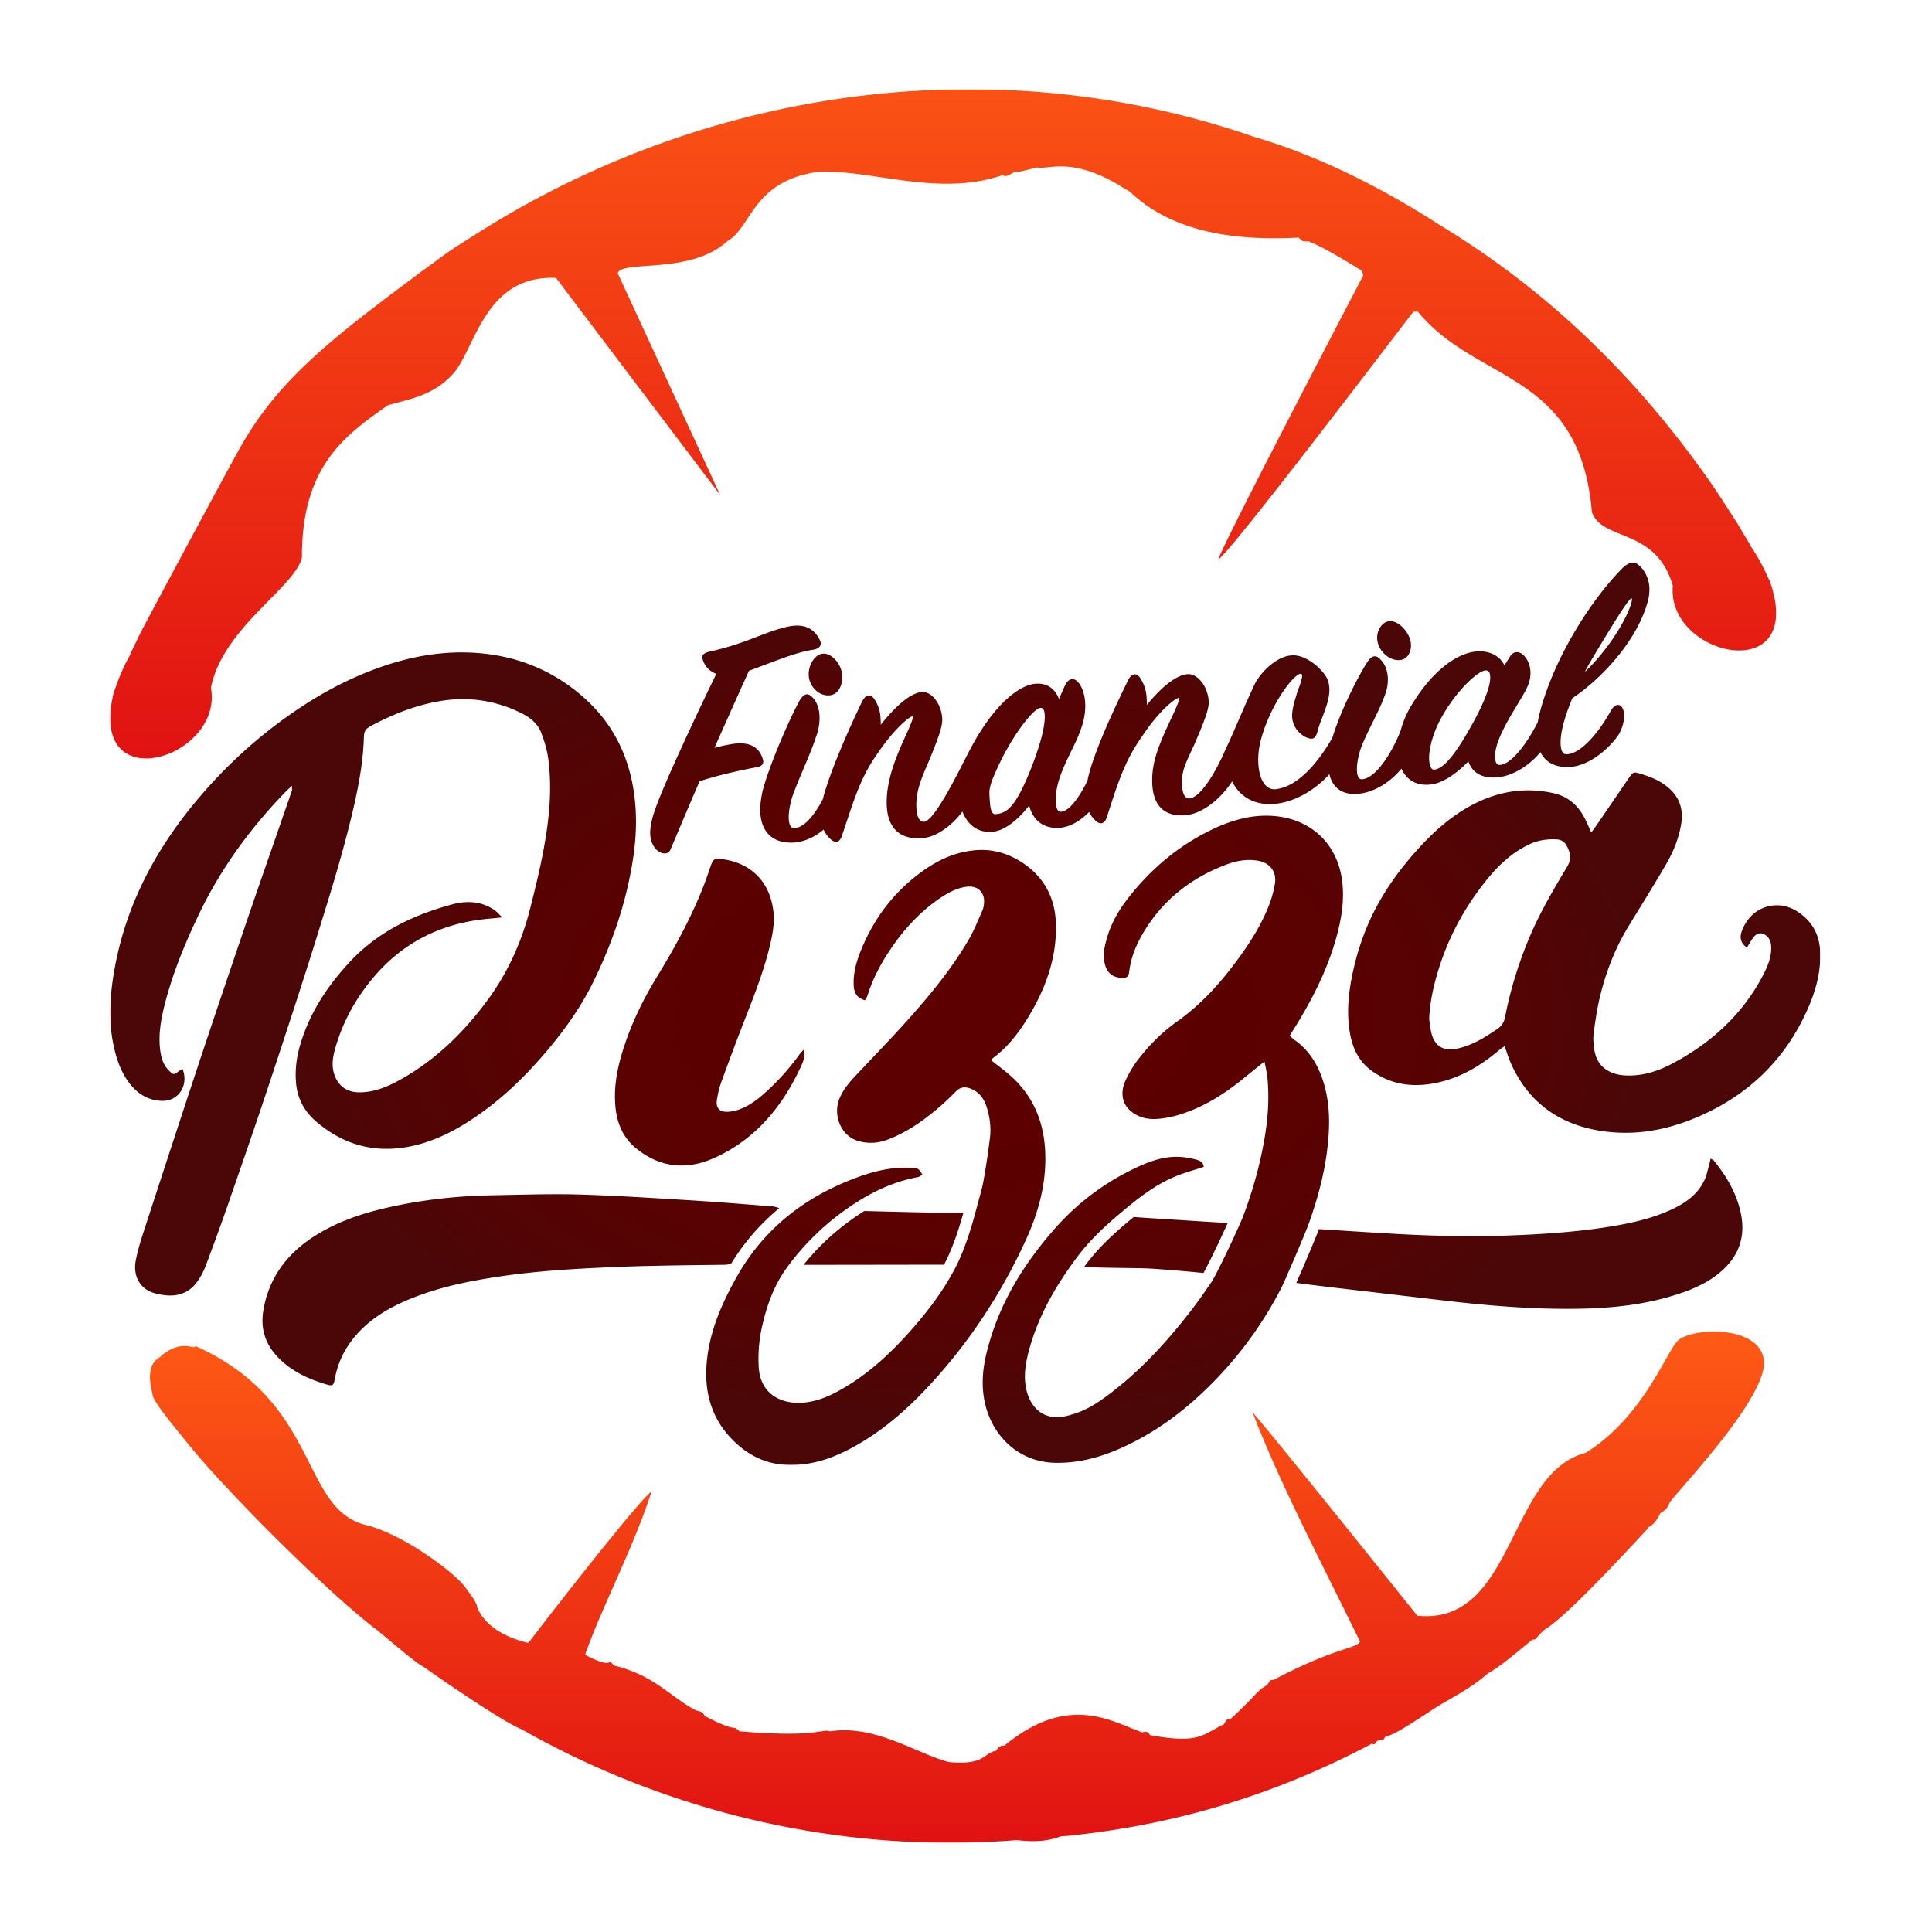 Ep 155  Financial Pizza Plenty to talk about this week. Join Pete D'Arruda, Eric Kearney and Joe Murphy on the current state of retirement.